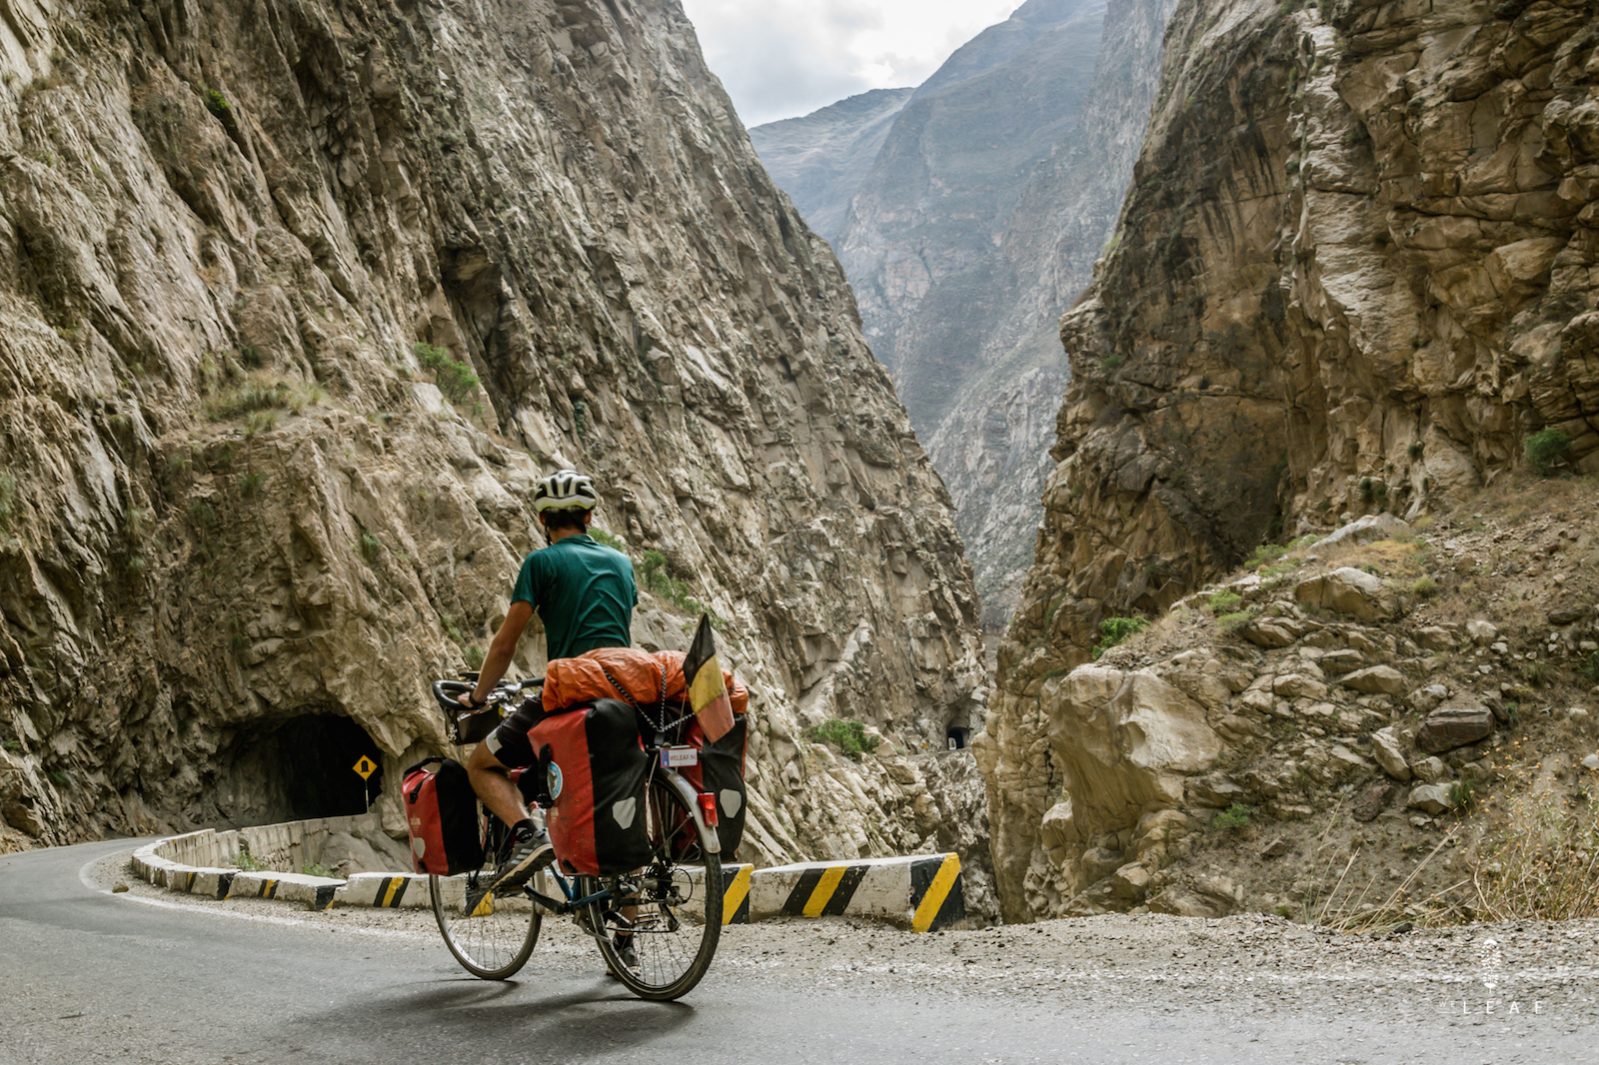 The car-free cycling route in Peru